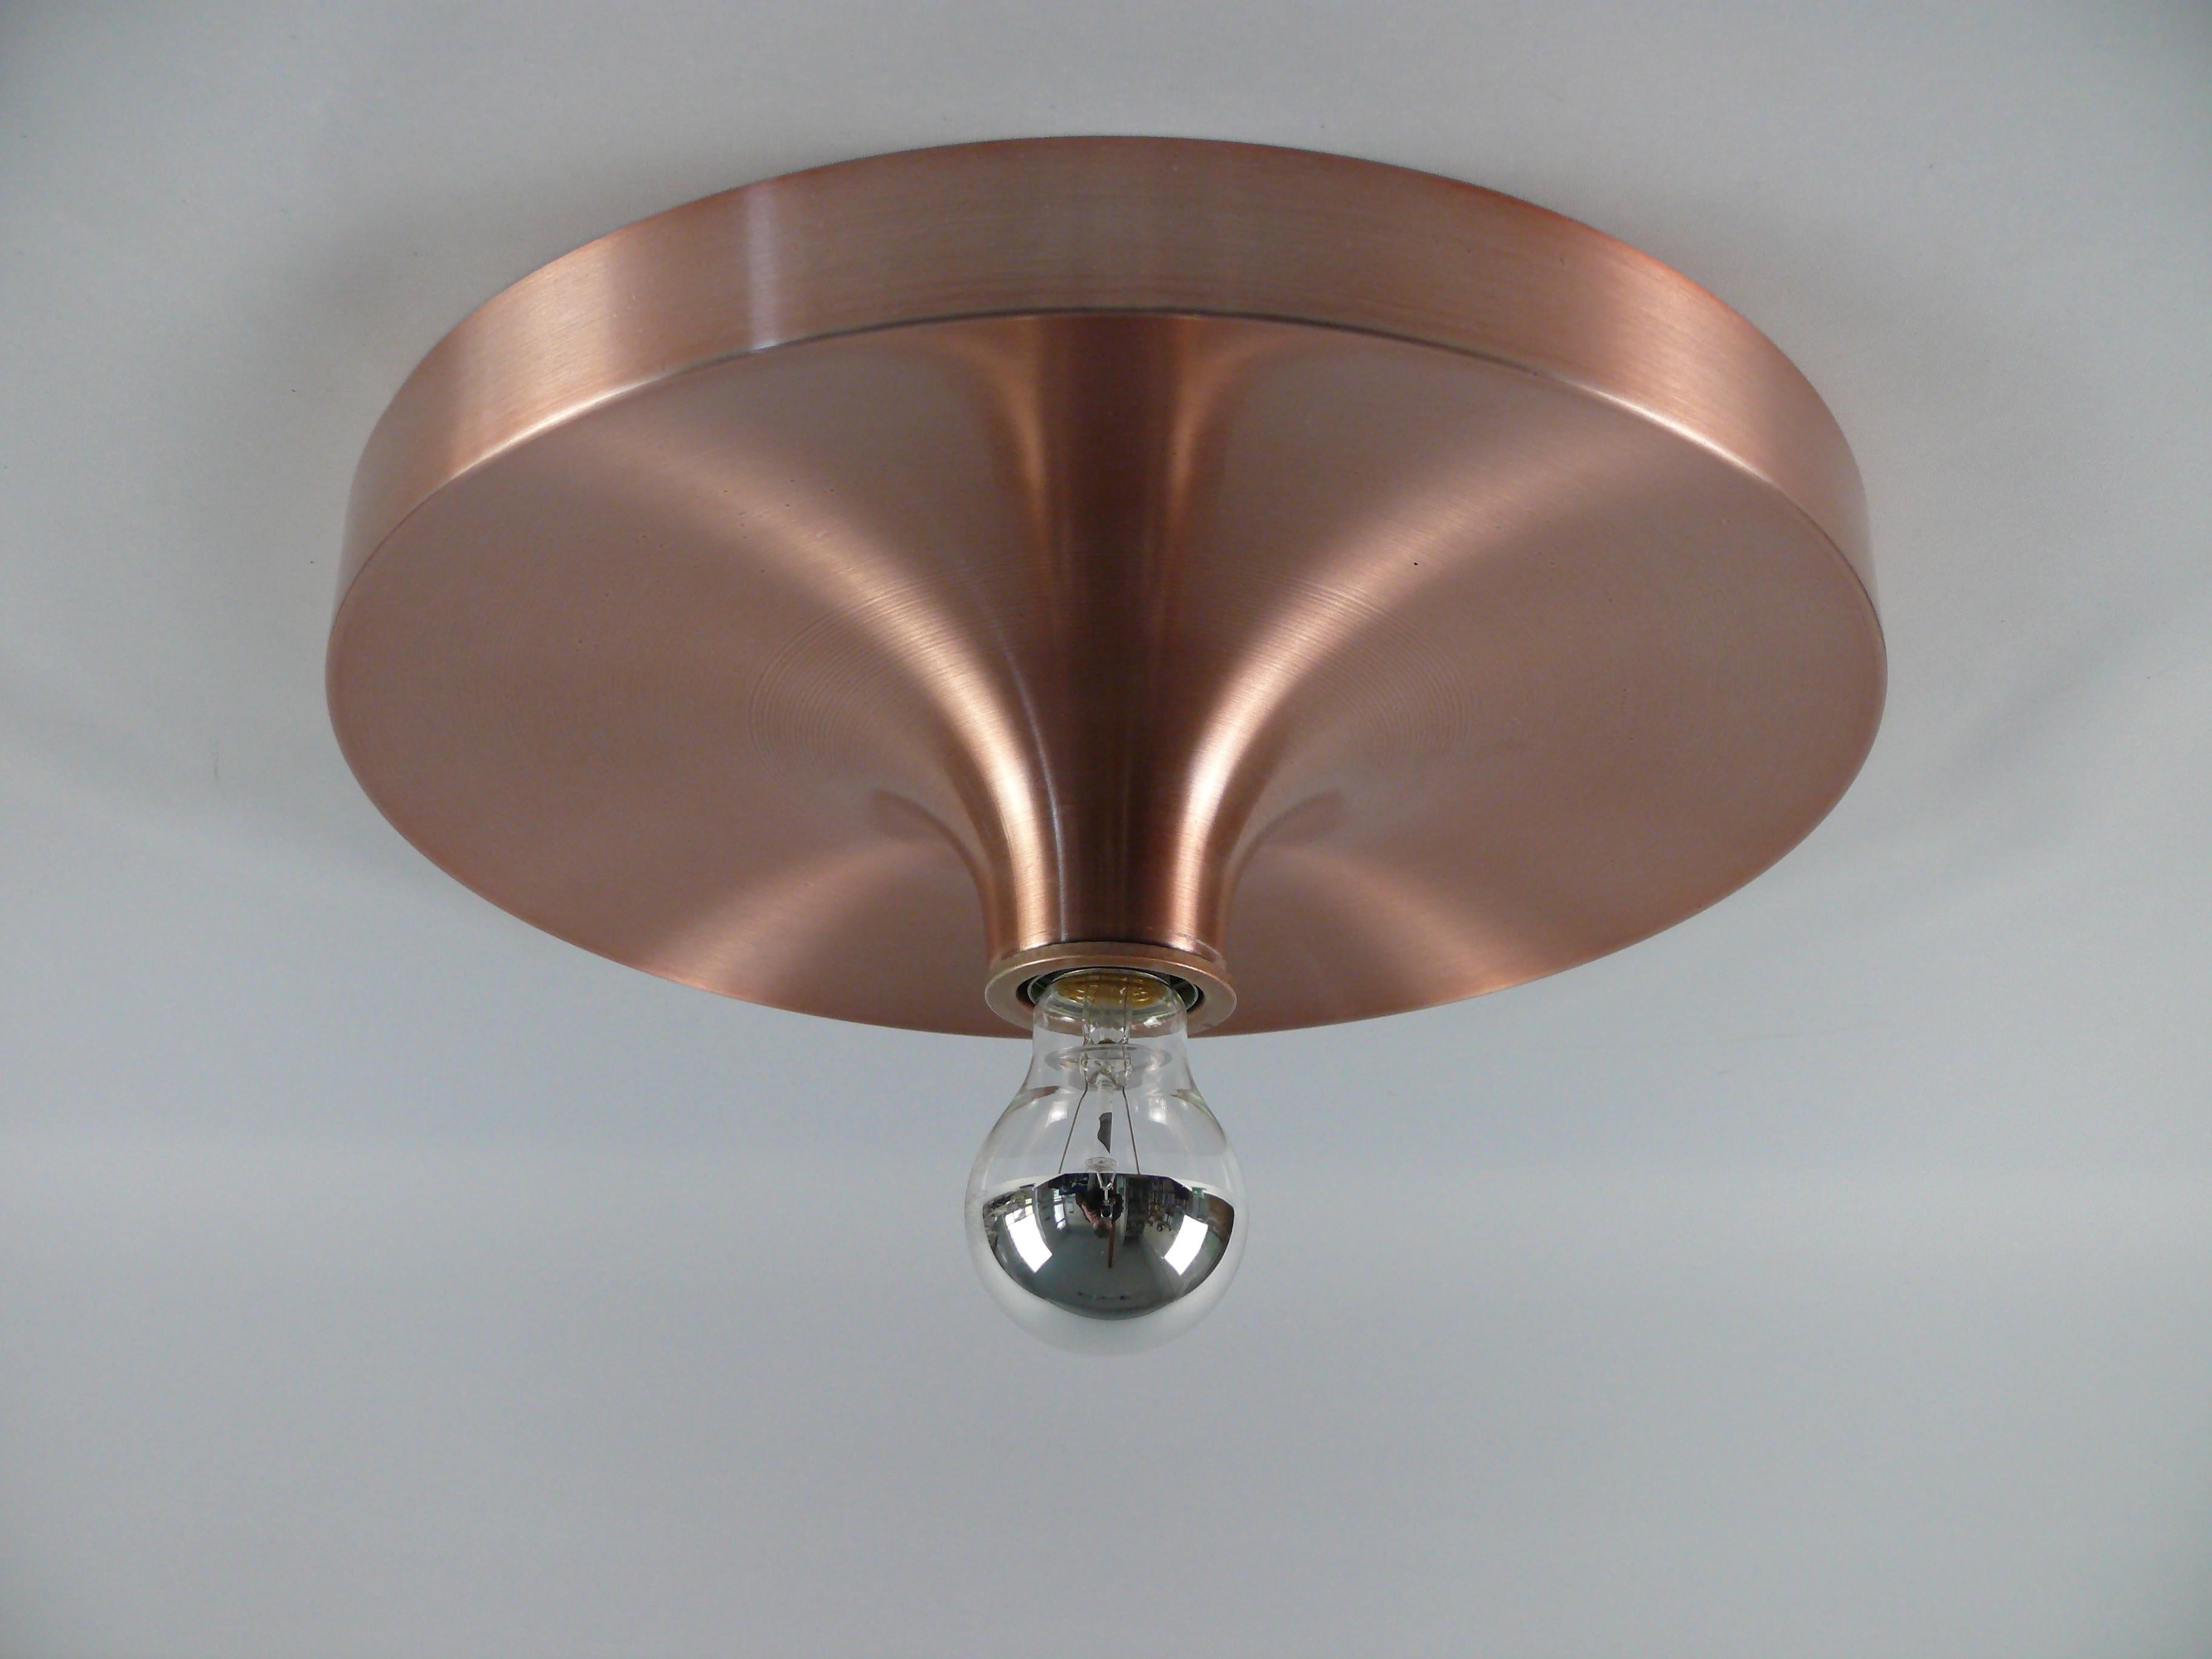 Mid-20th Century Space Age Wall Light, Flush Mount by Teka, Germany, 1960s